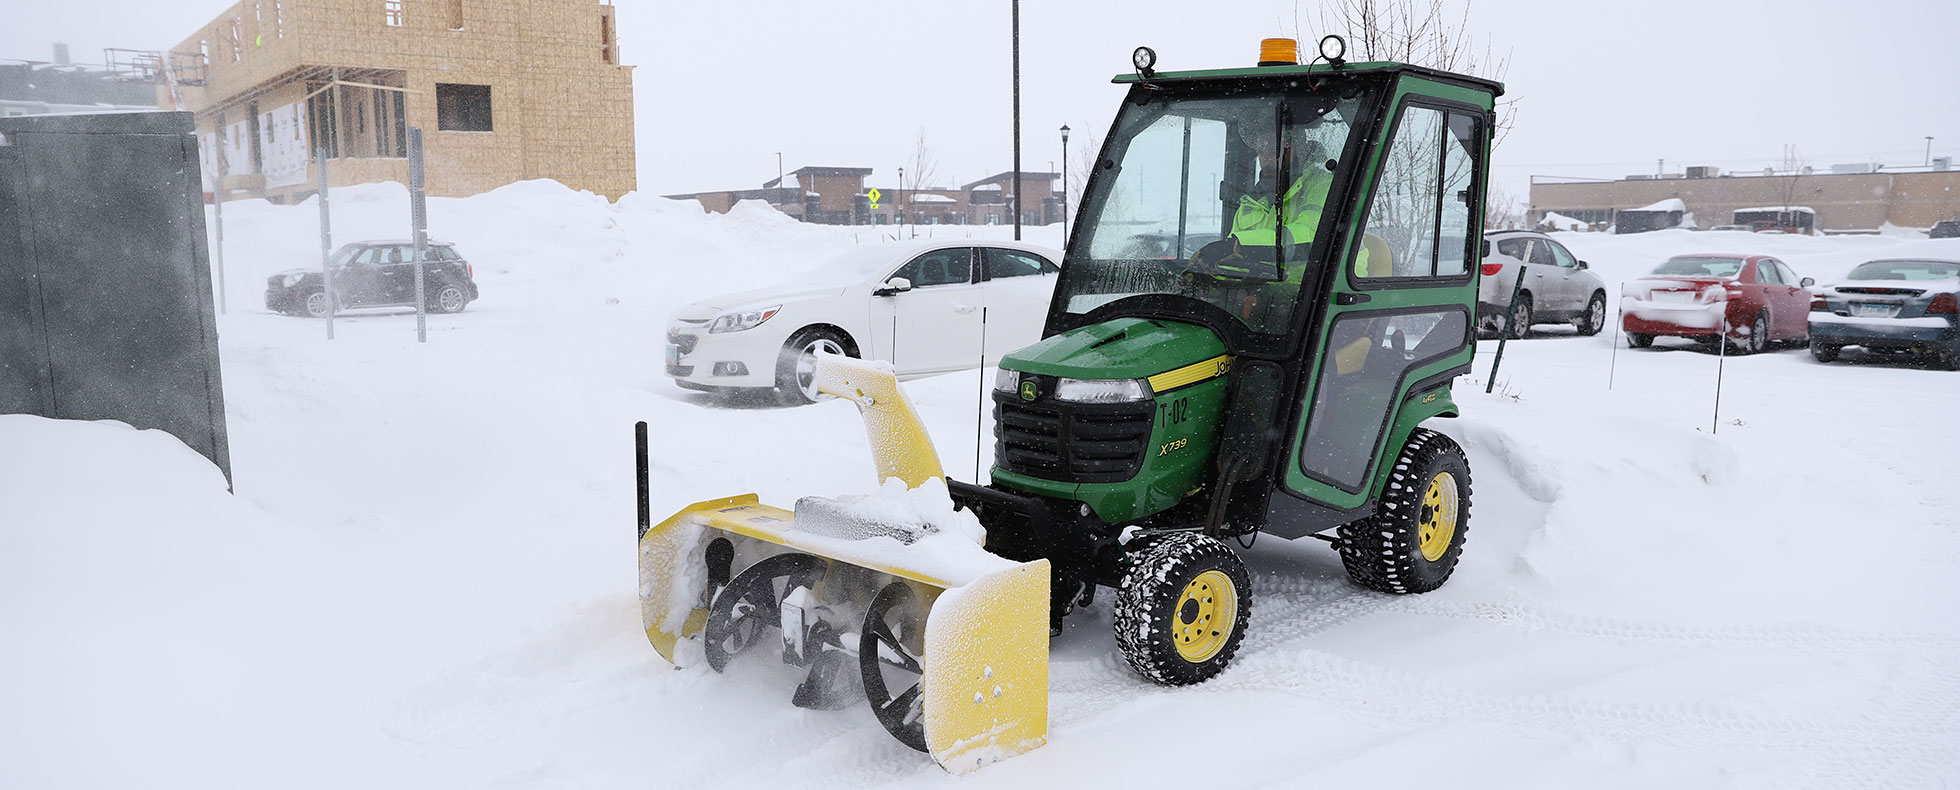 RDO Equipment Co. and John Deere X700 Tractor for Snow Removal